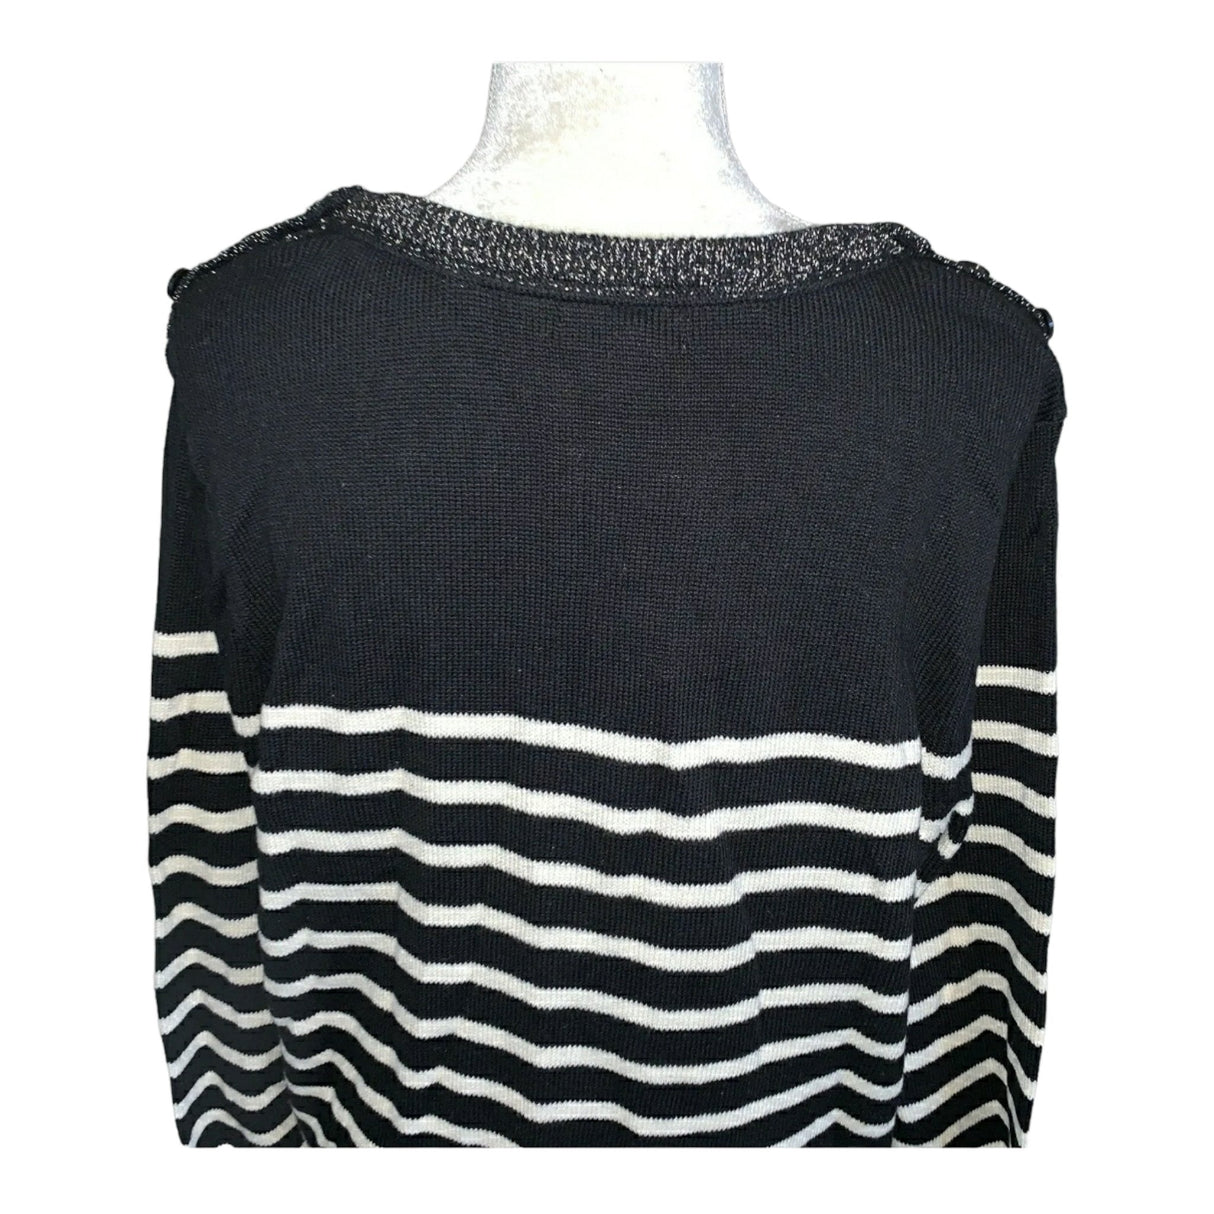 Charter Club Women's Long Sleeve Striped Black Ivory Sweater Size Small - BELLEZA'S - Charter Club Women's Long Sleeve Striped Black Ivory Sweater Size Small - BELLEZA'S - Sweater -